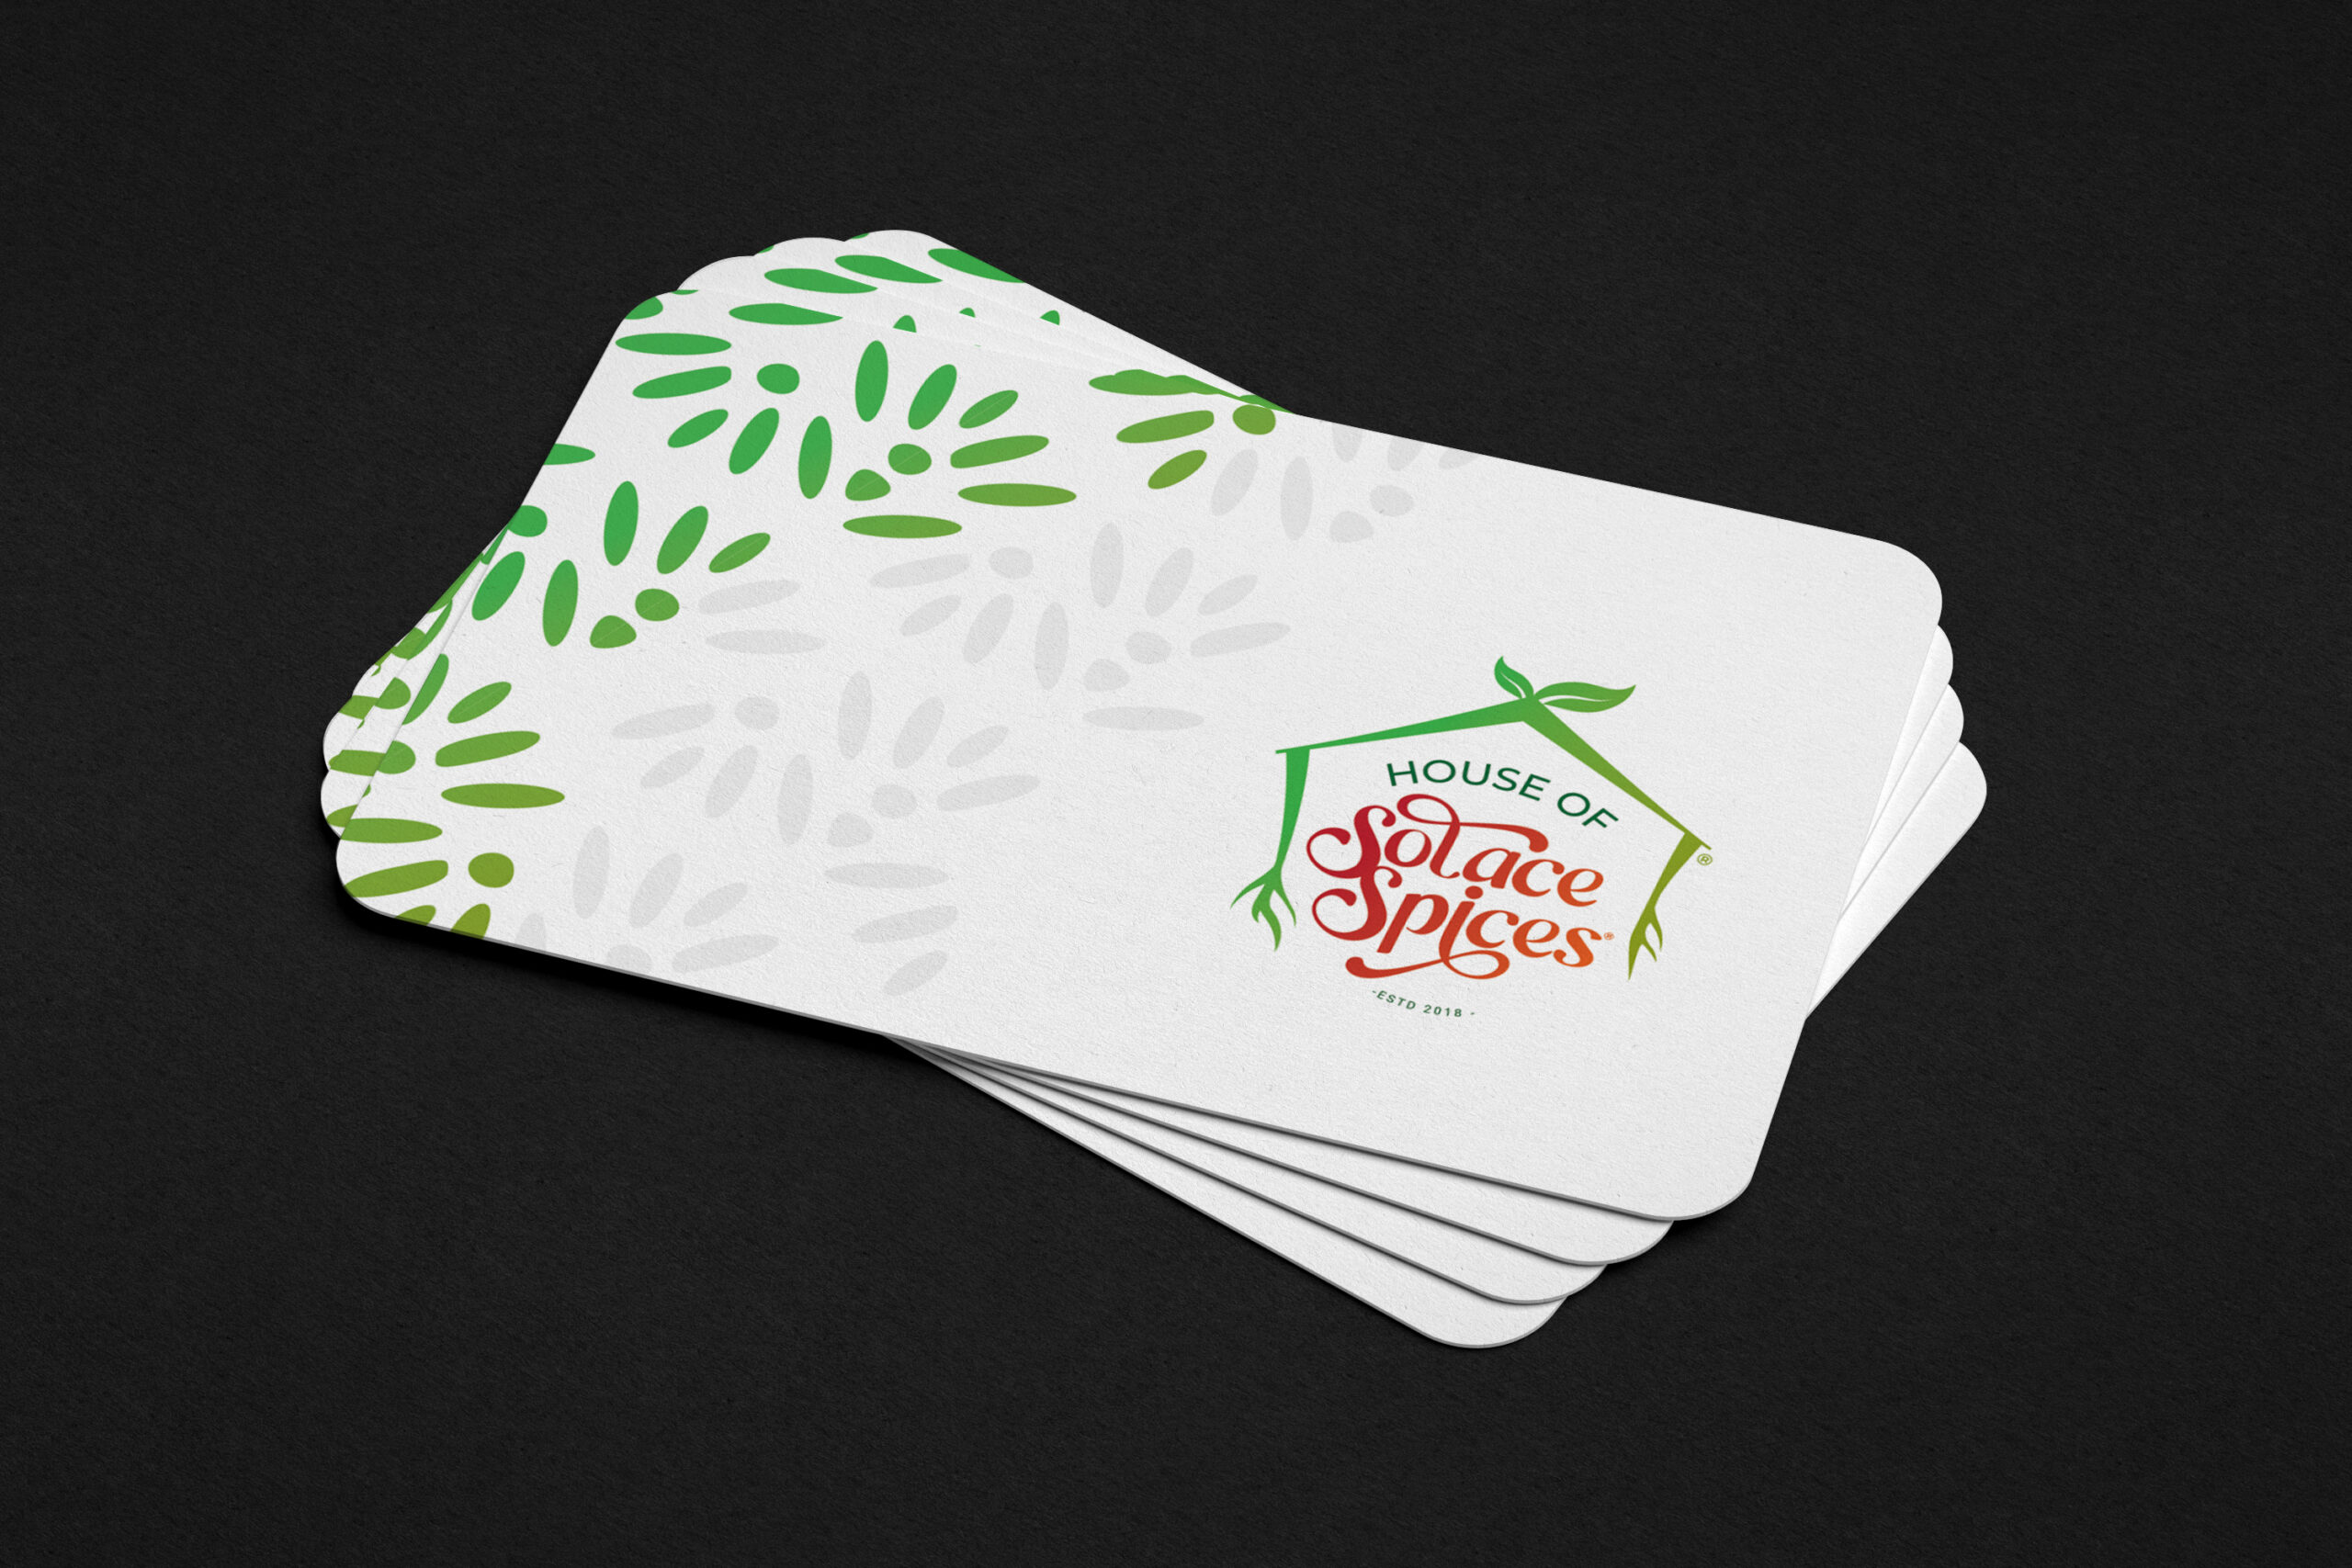 House-Of-Solace-Spices-Business-Card-scaled1